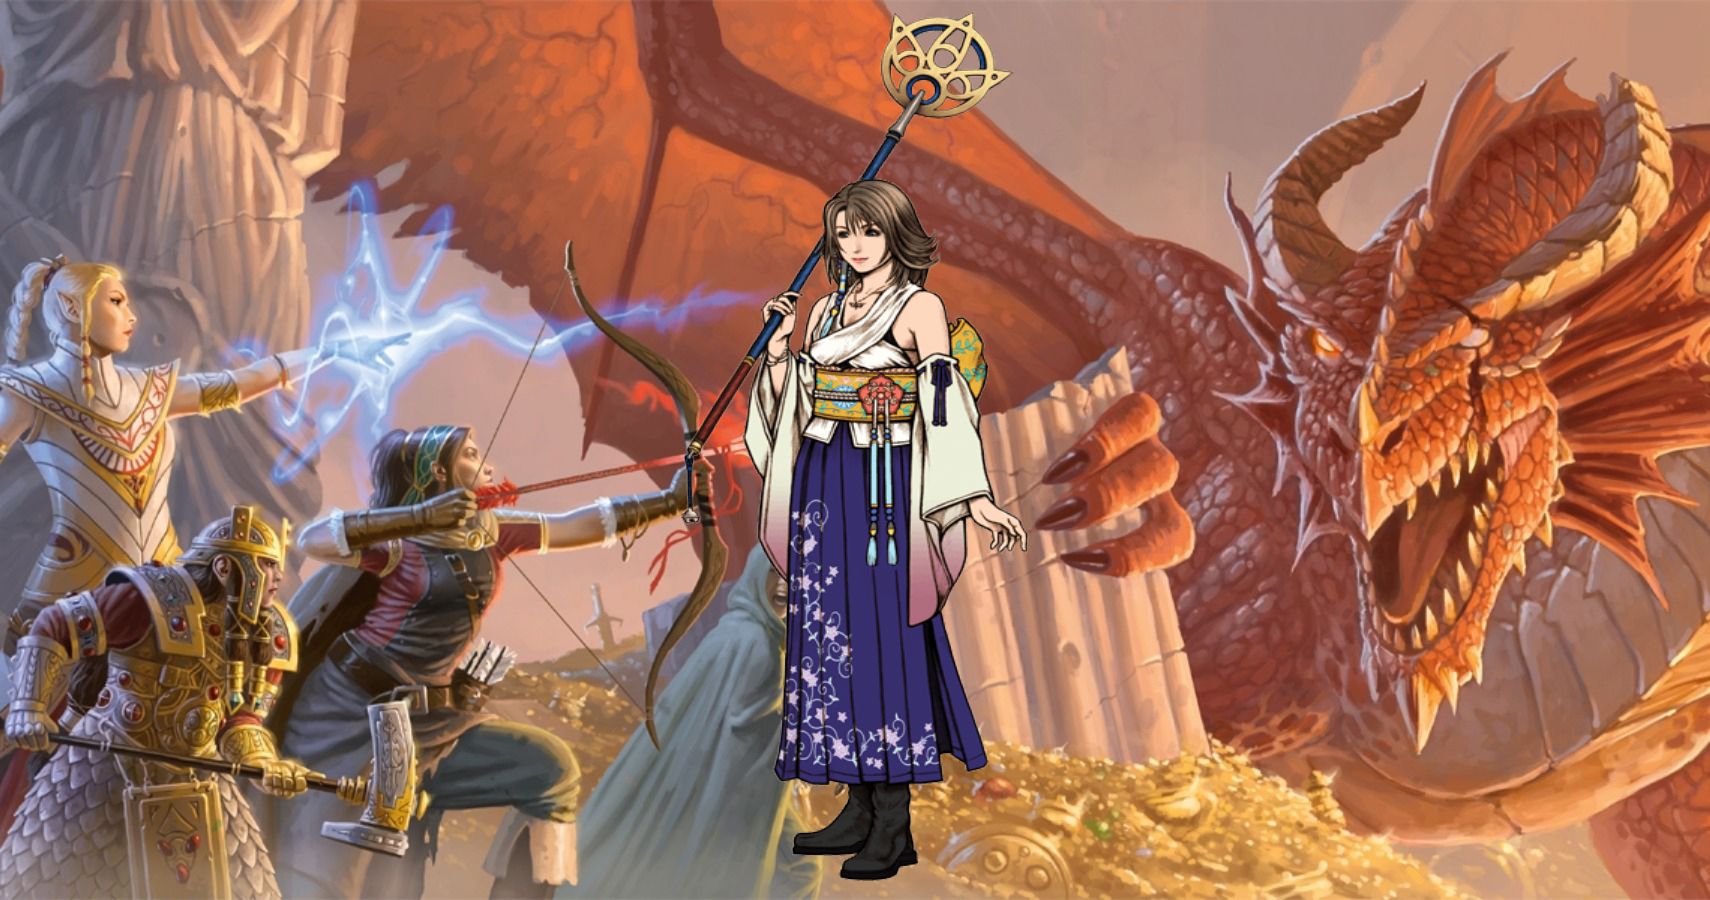 How To Build Yuna From Final Fantasy X In Dungeons & Dragons